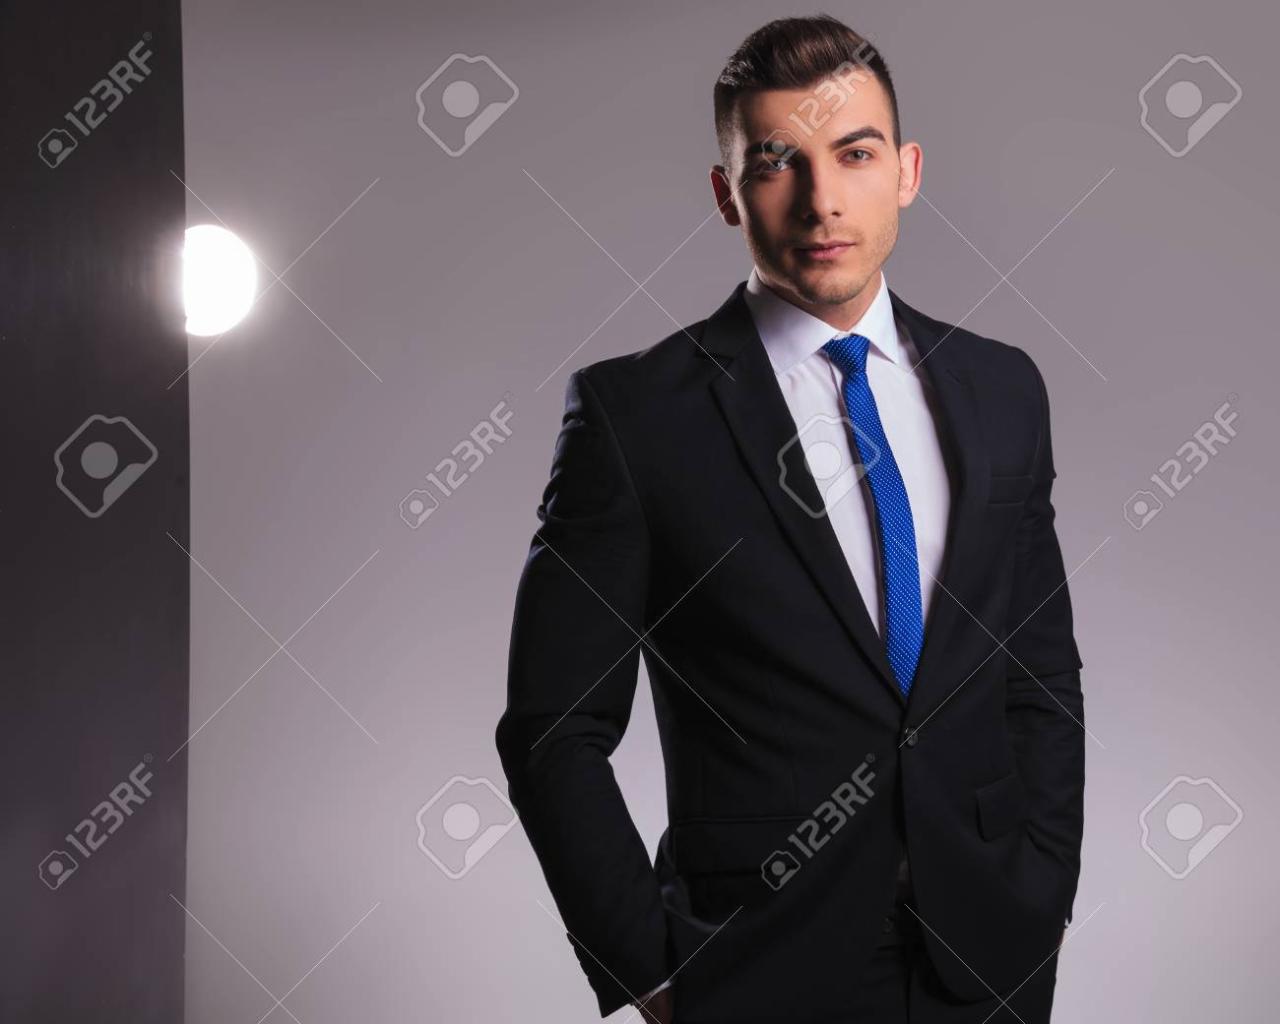 Man In Black Suit With Blue Tie Standing With Hands In His Pockets Being  Fashion Stock Photo, Picture And Royalty Free Image. Image 117534922.